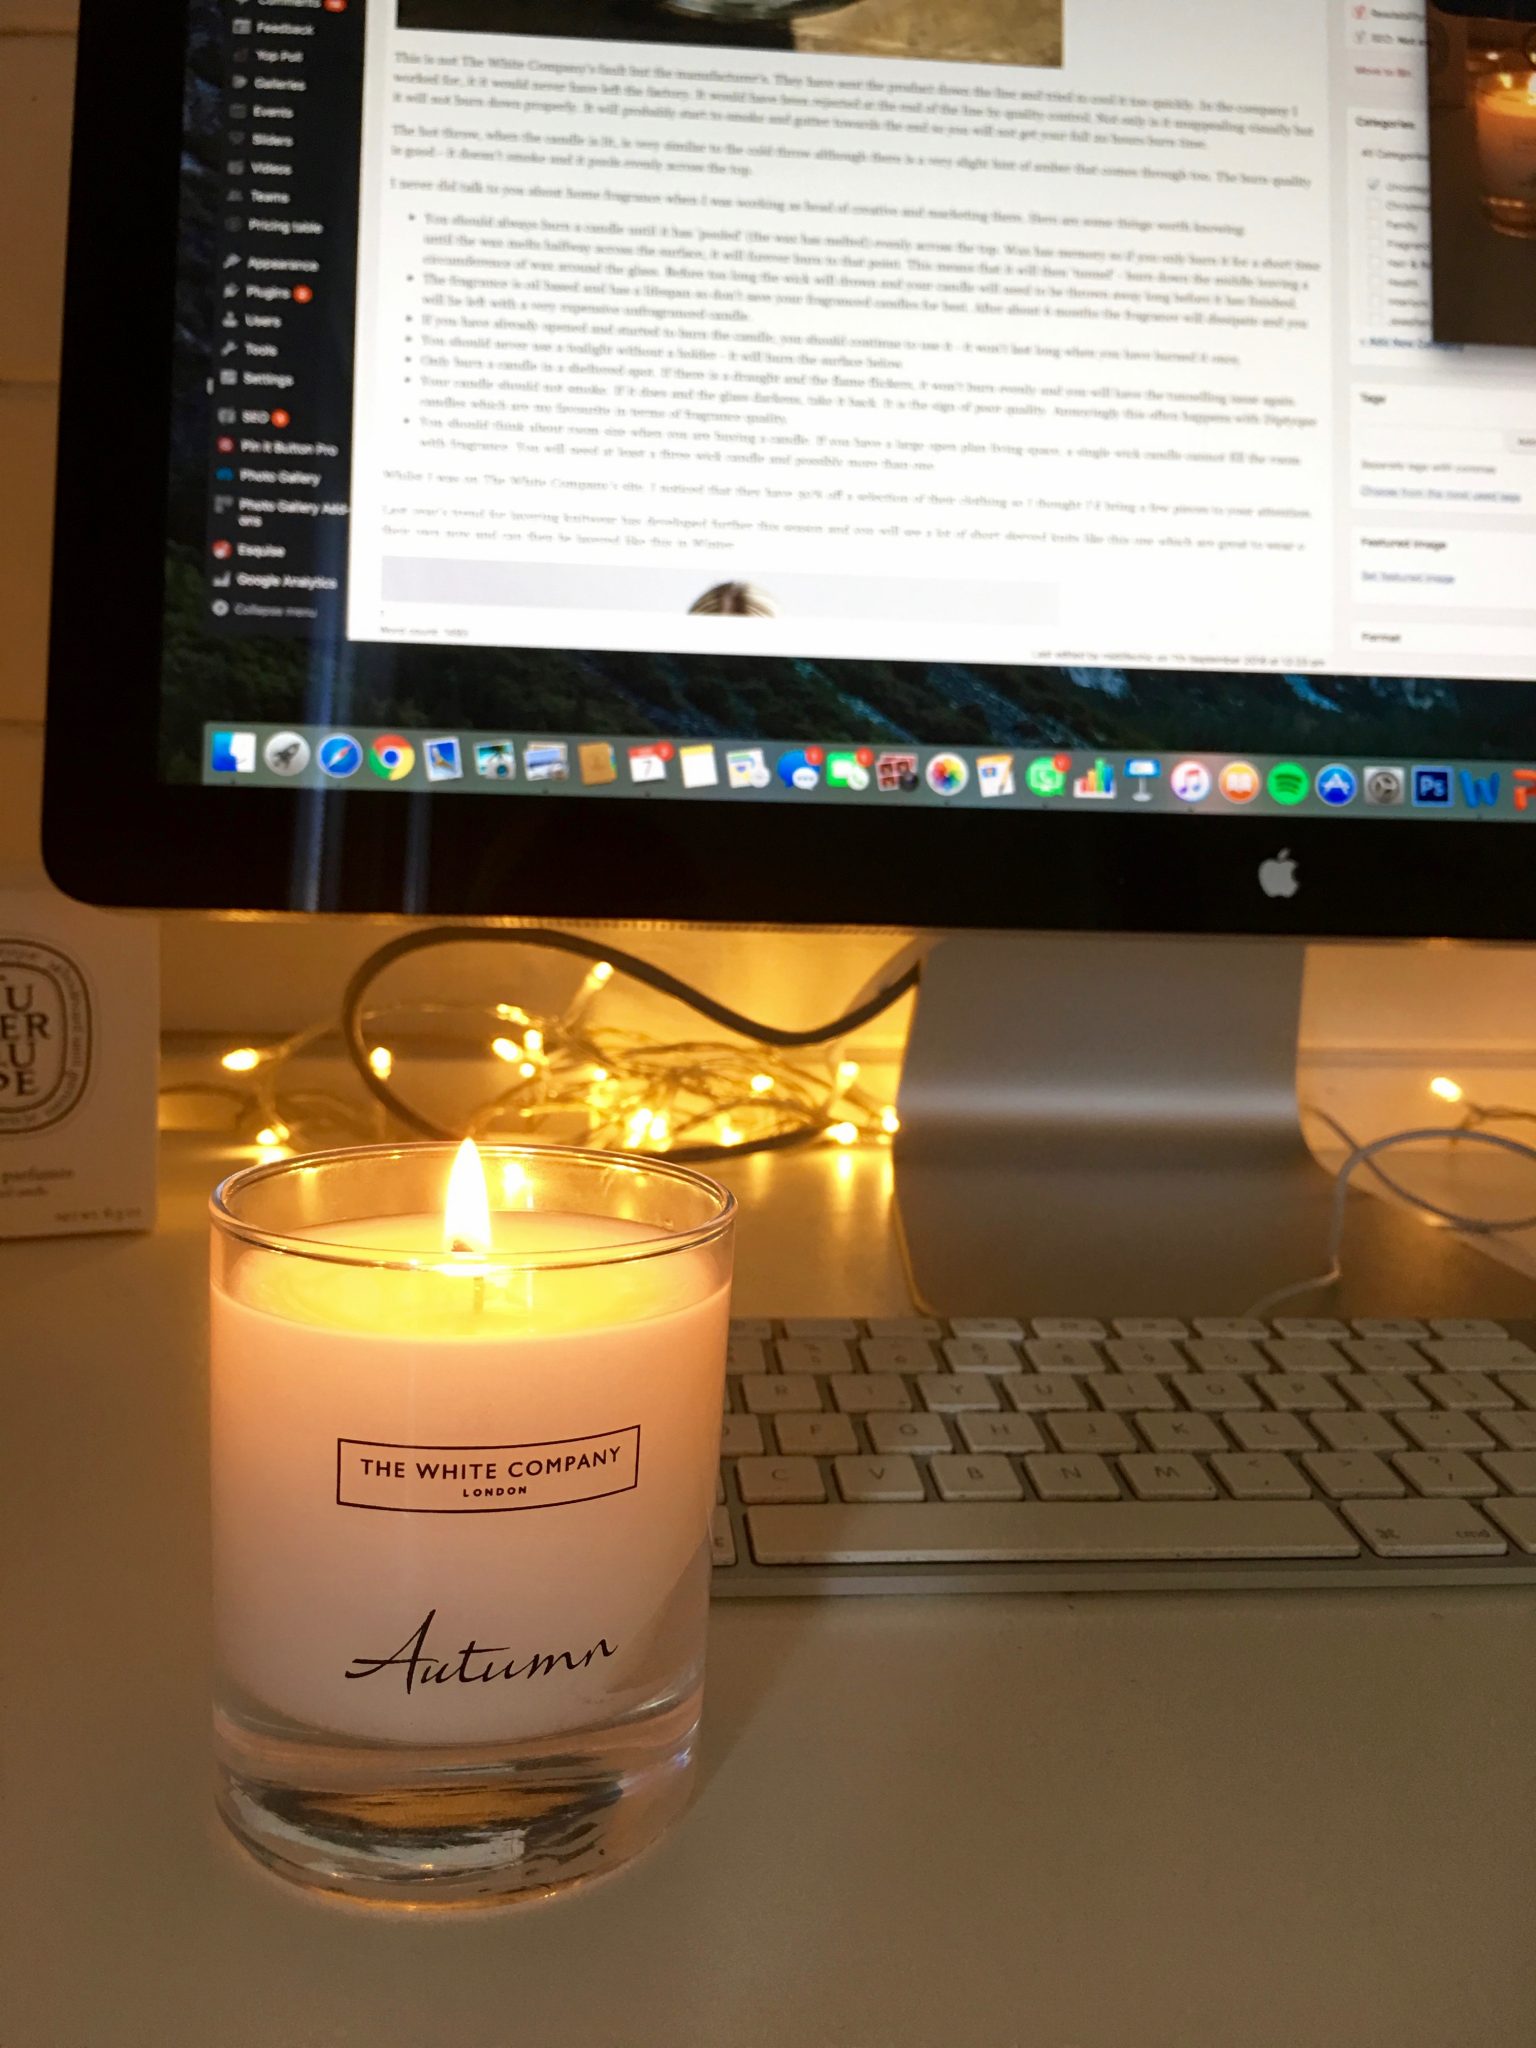 The White Company Autumn candle review (1)